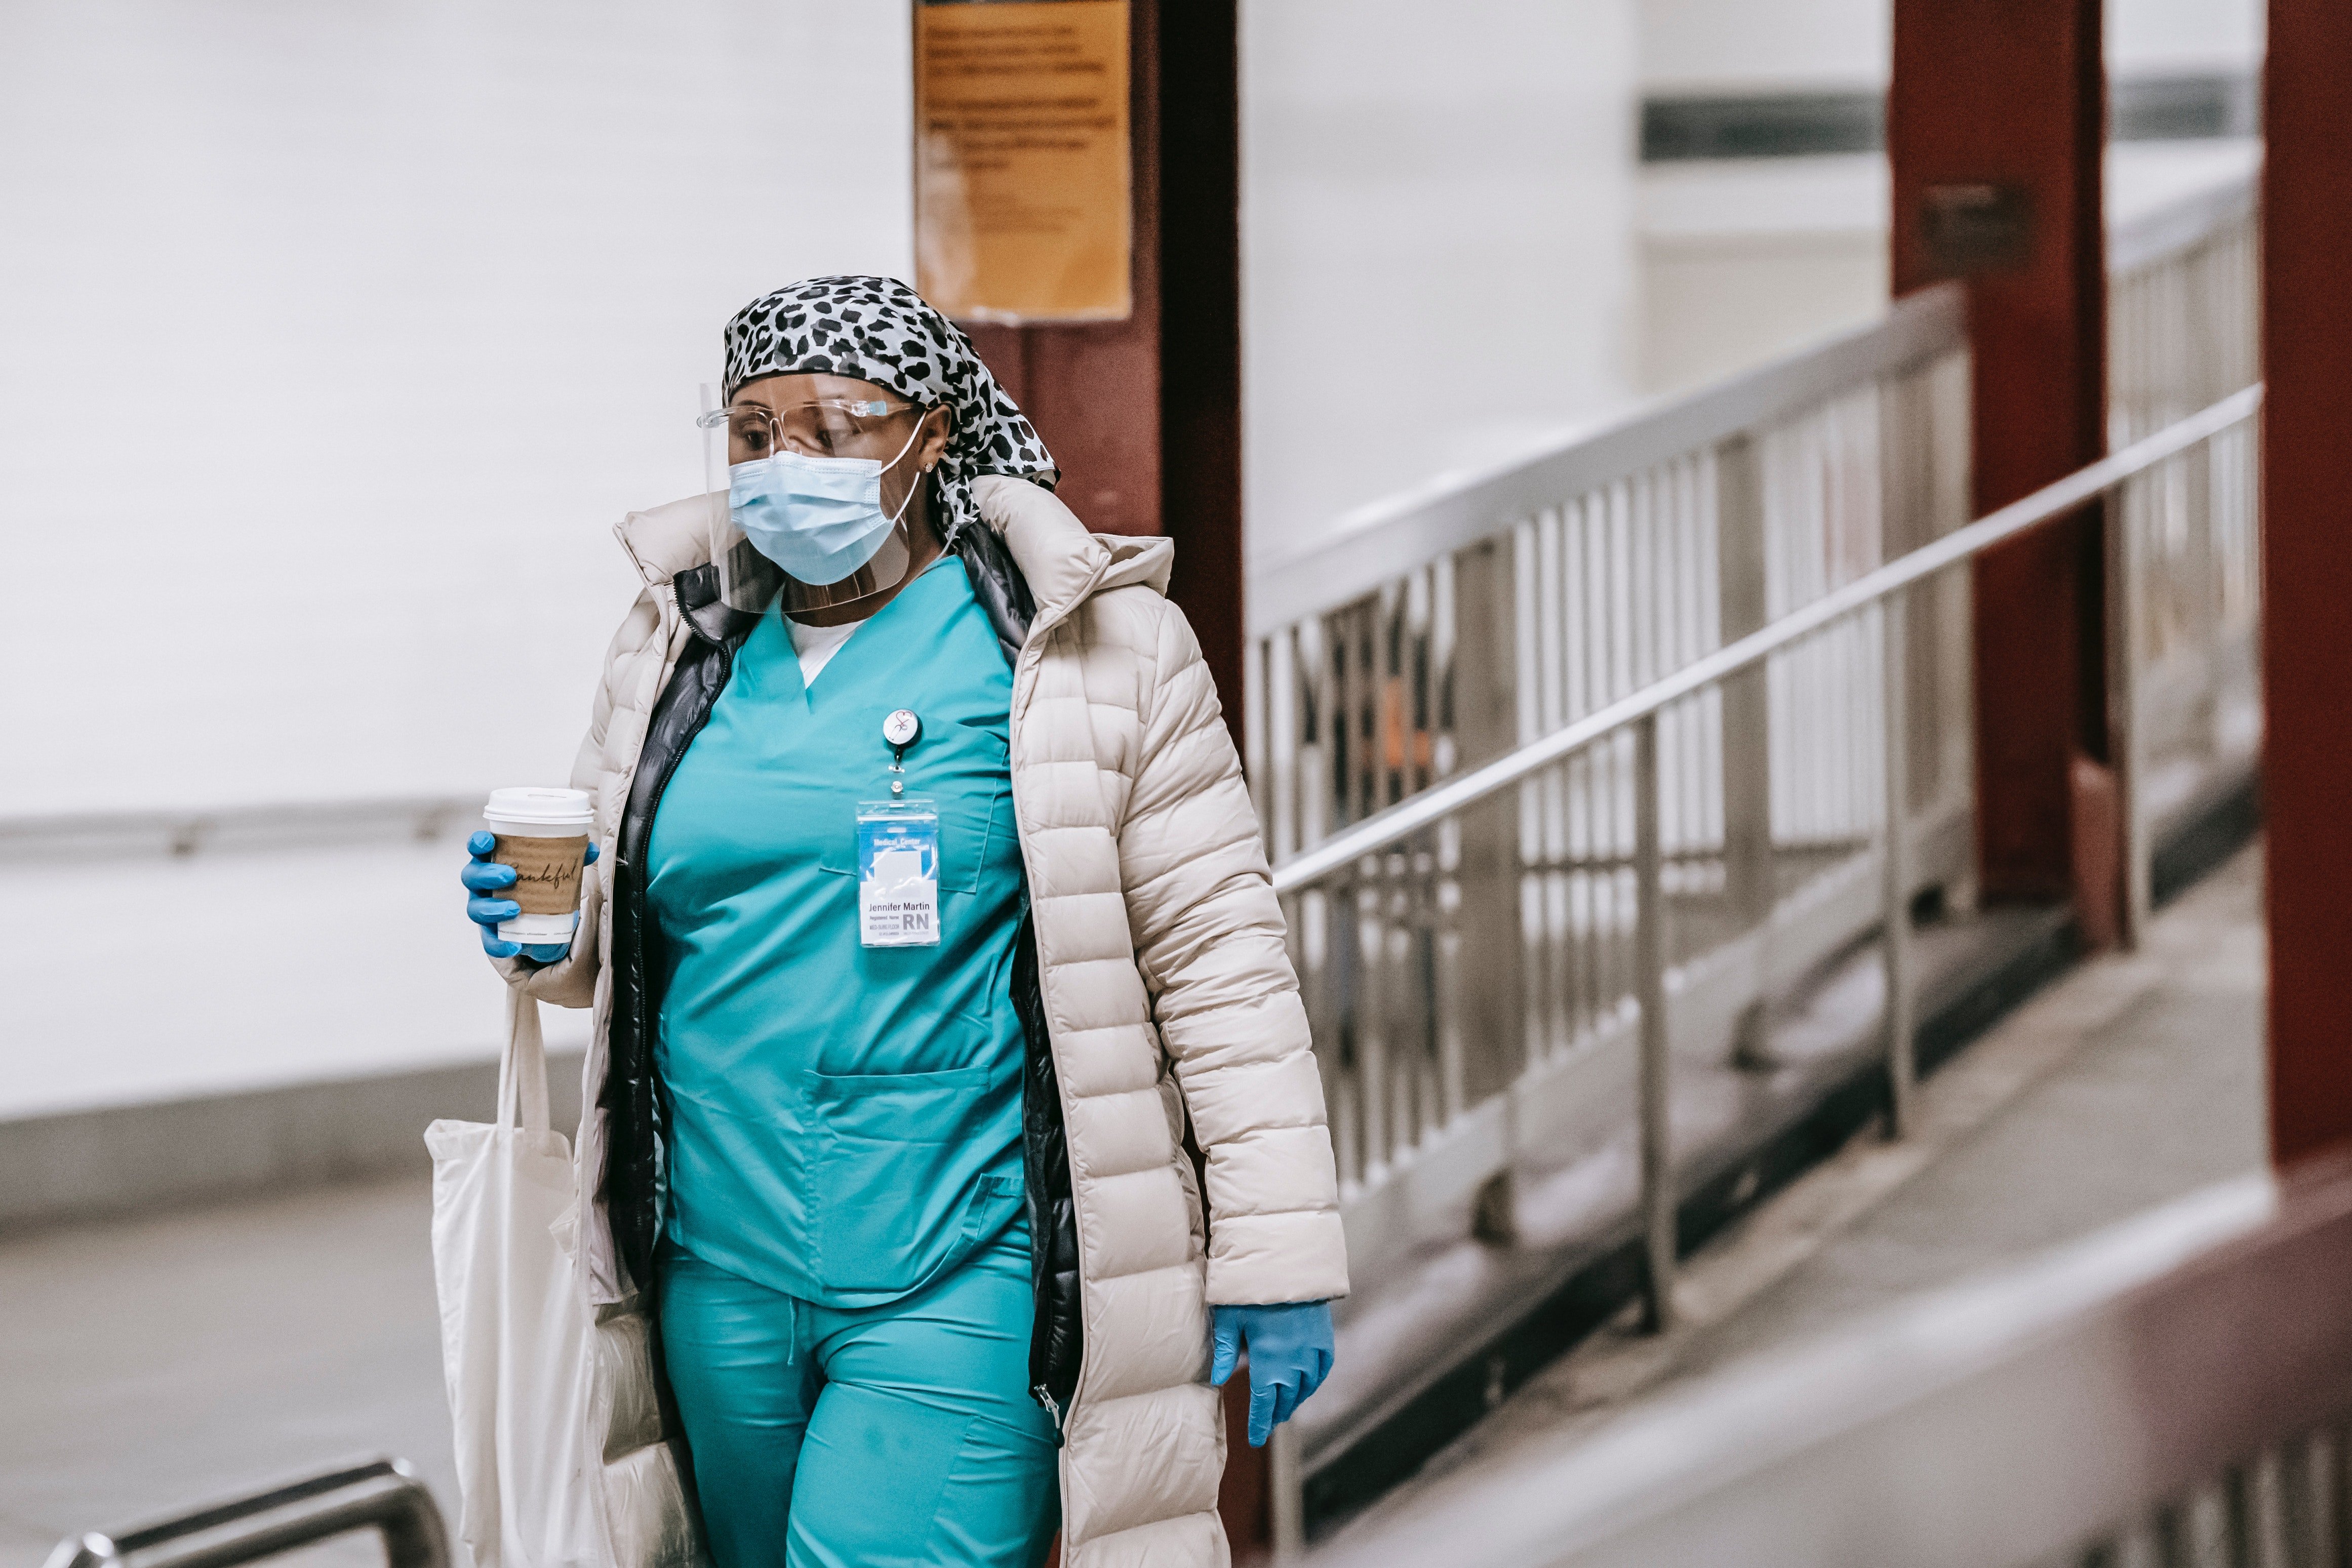 Pictured - A black female in a nurse uniform wearing protective mask and gloves | Source: Pexels 